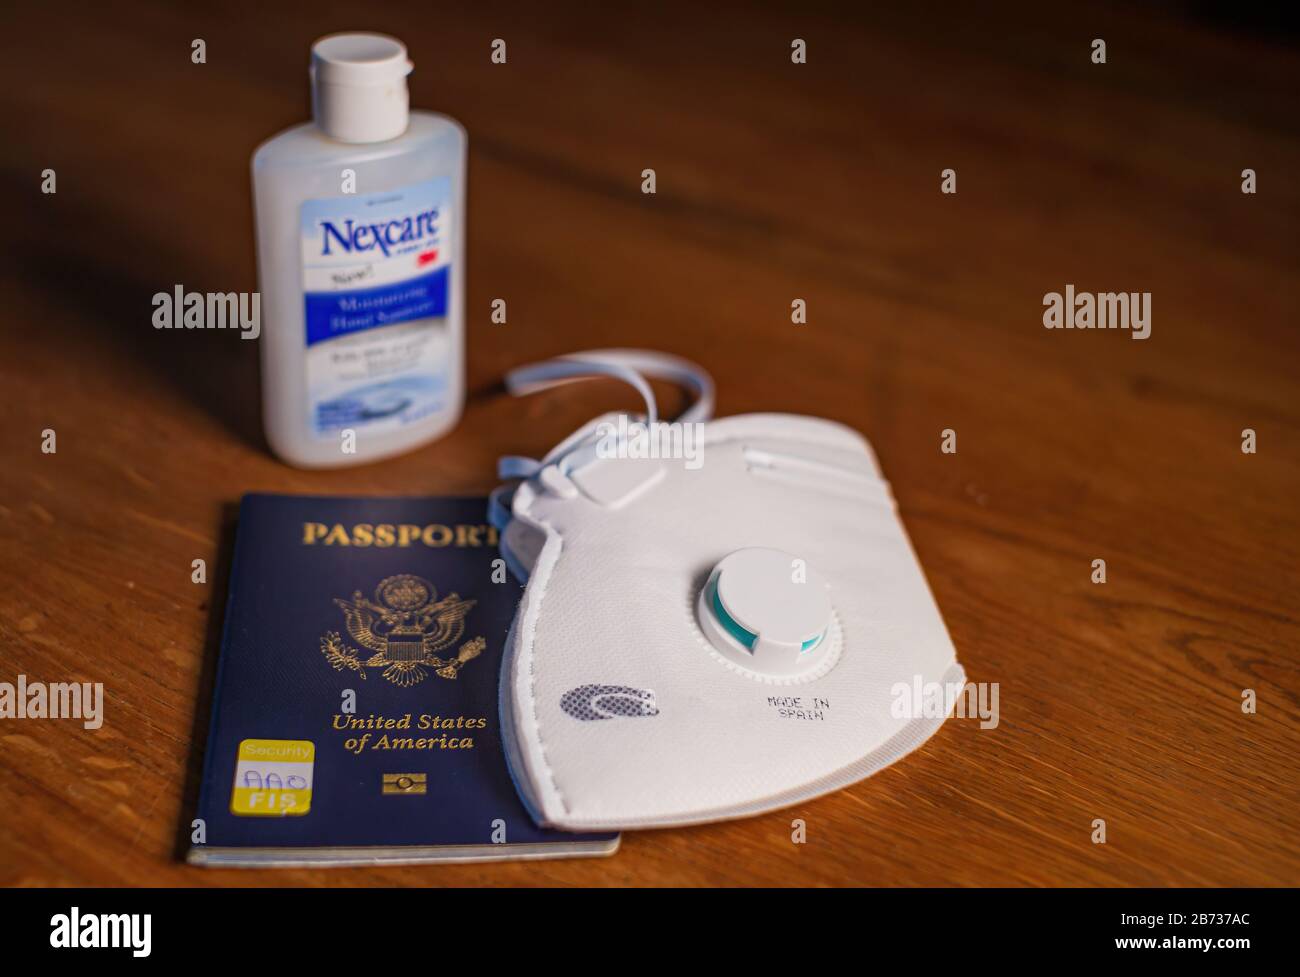 Boston, USA - 13 March 2020: Close up of mask, US passport and desinfactant on the table ready for travel in times of Coronavirus pandamic. Stock Photo